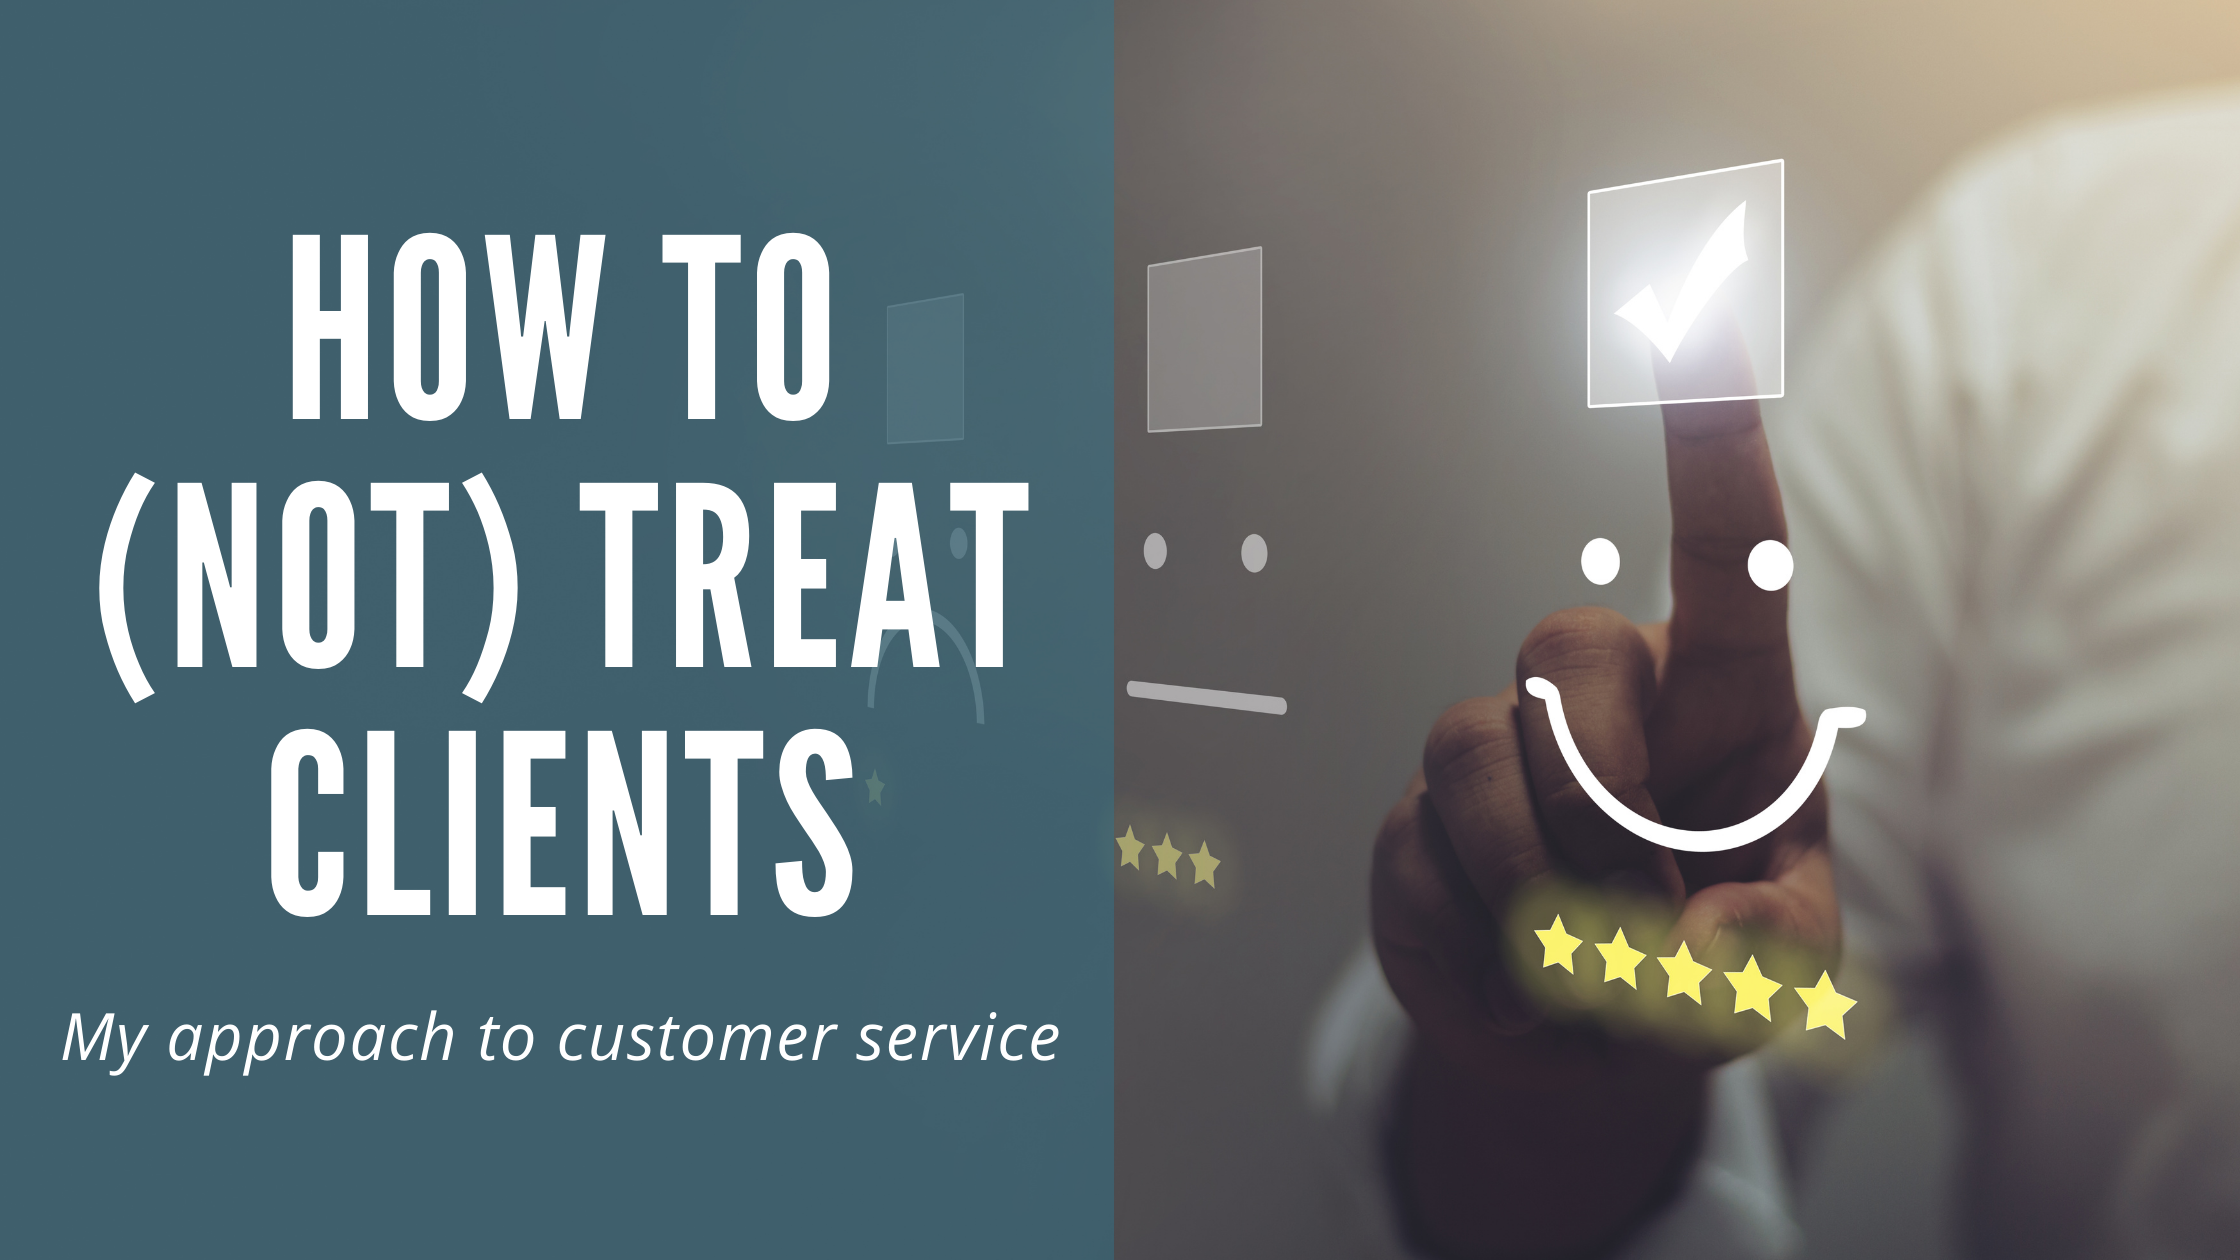 How to not treat clients; my approach to customer service.